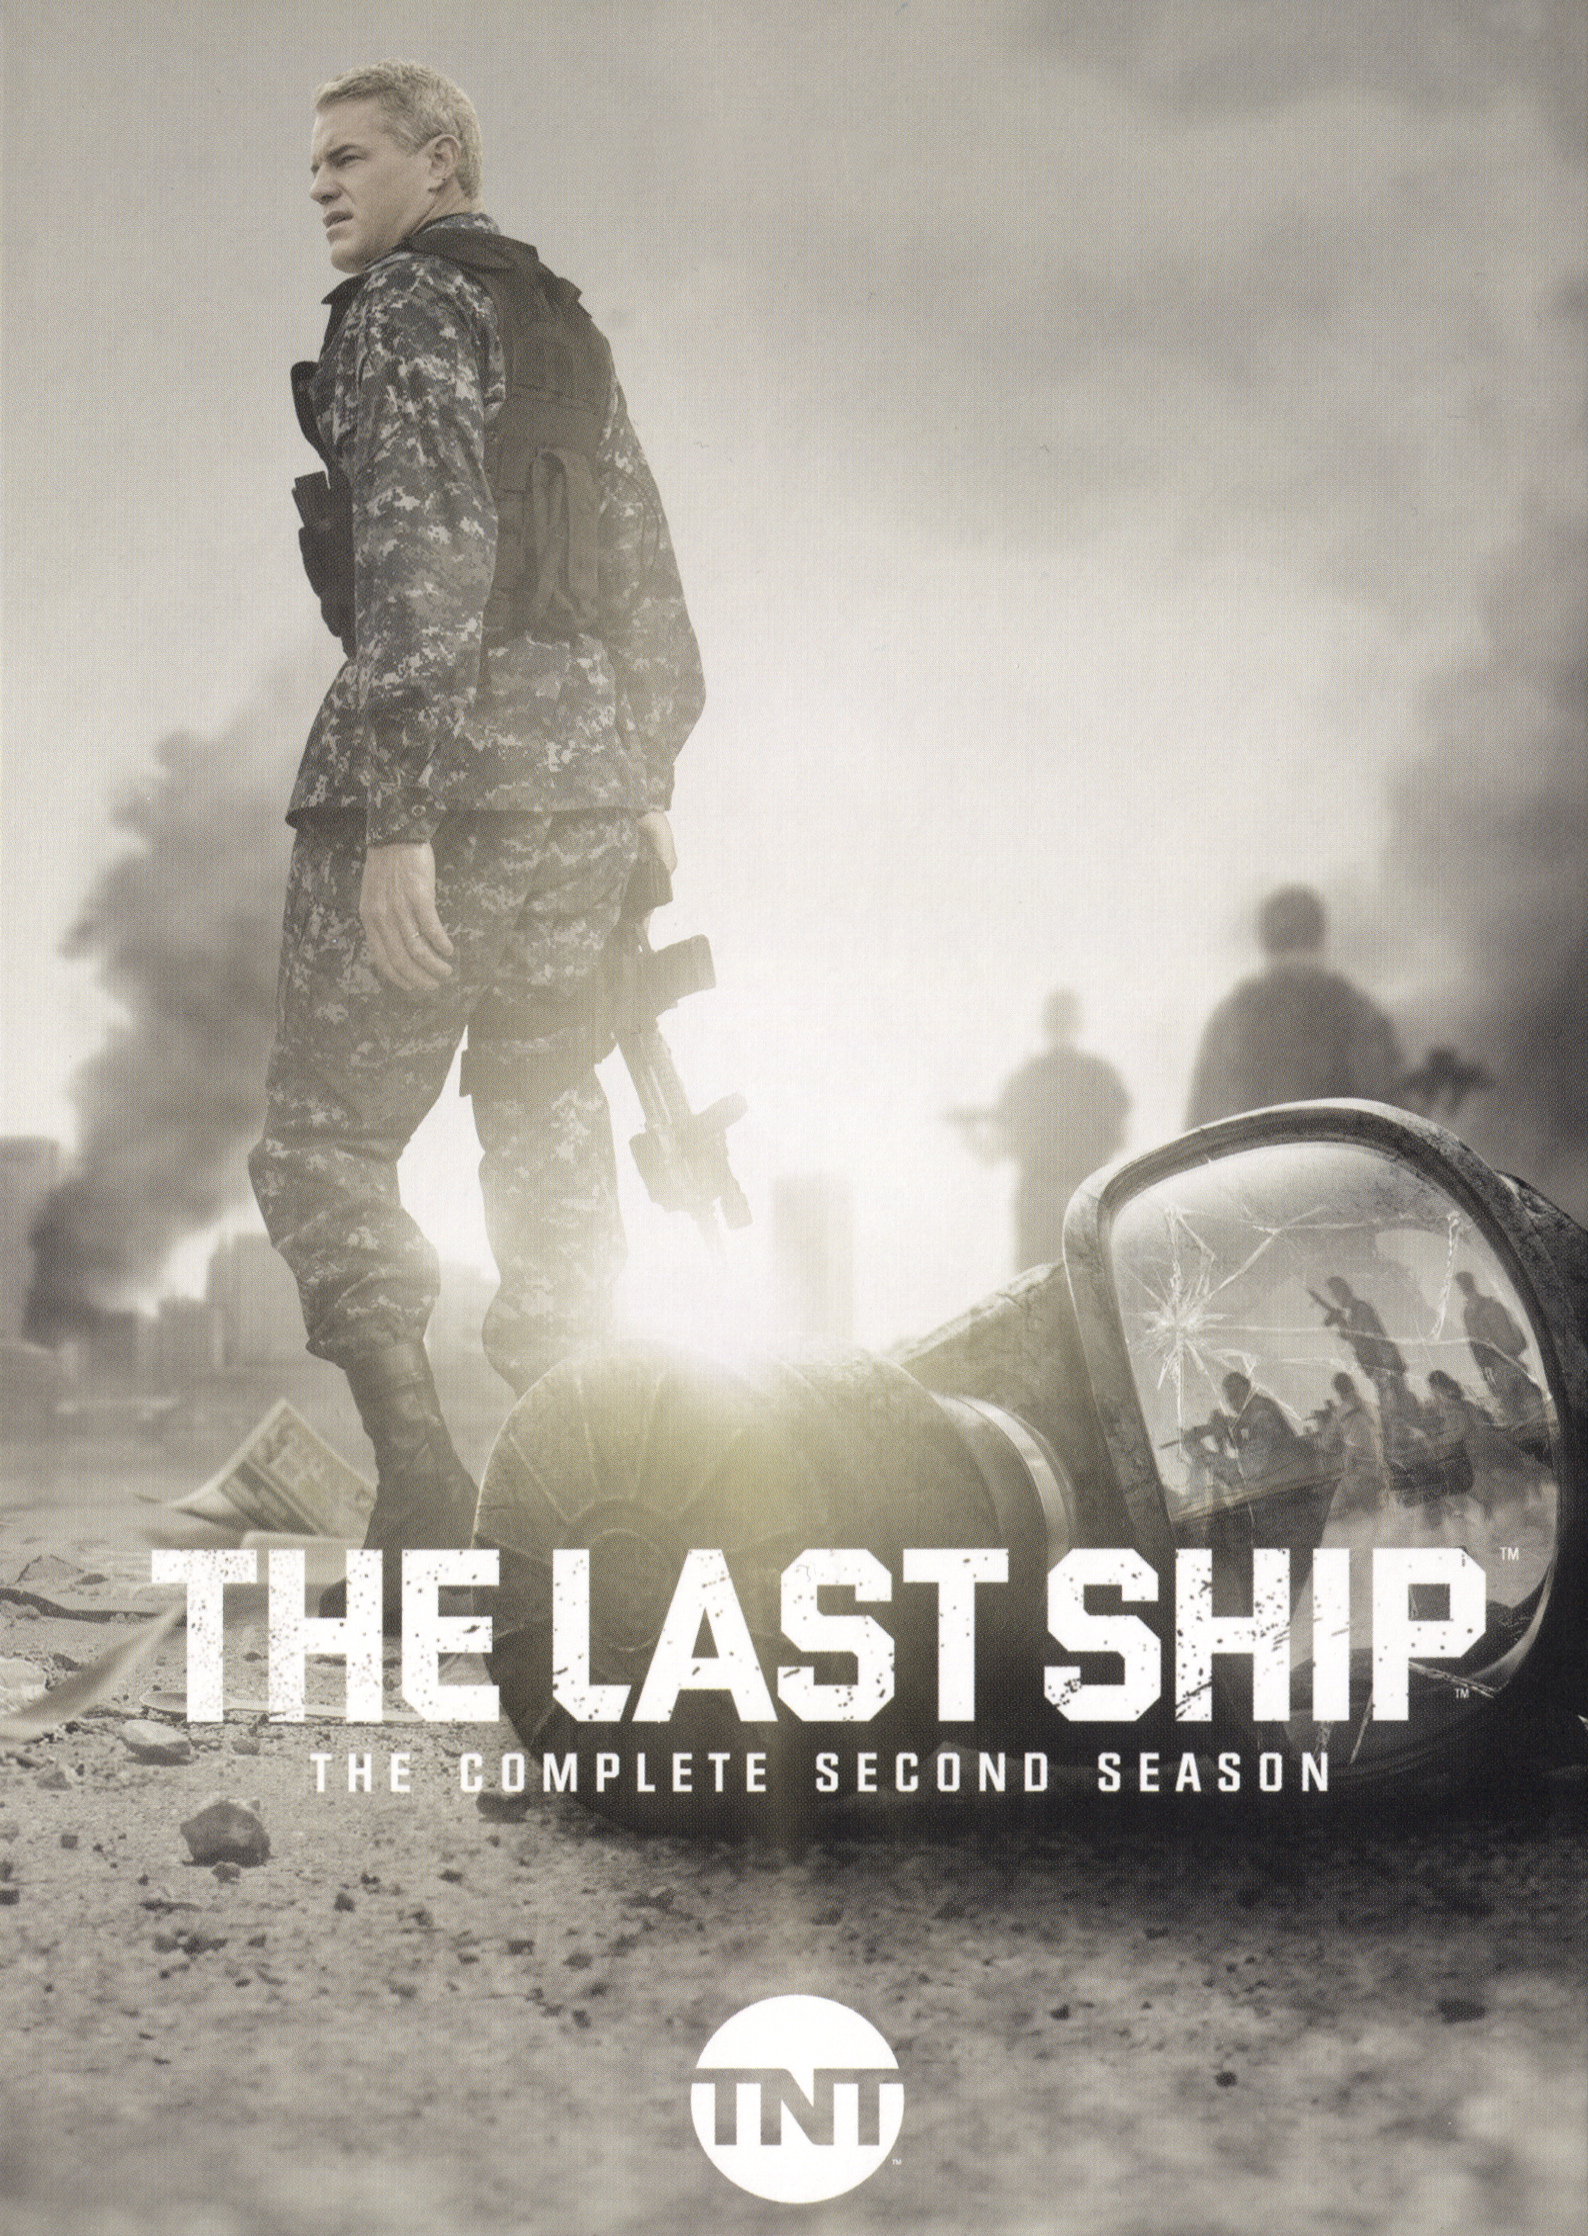 The Last Ship by William Brinkley